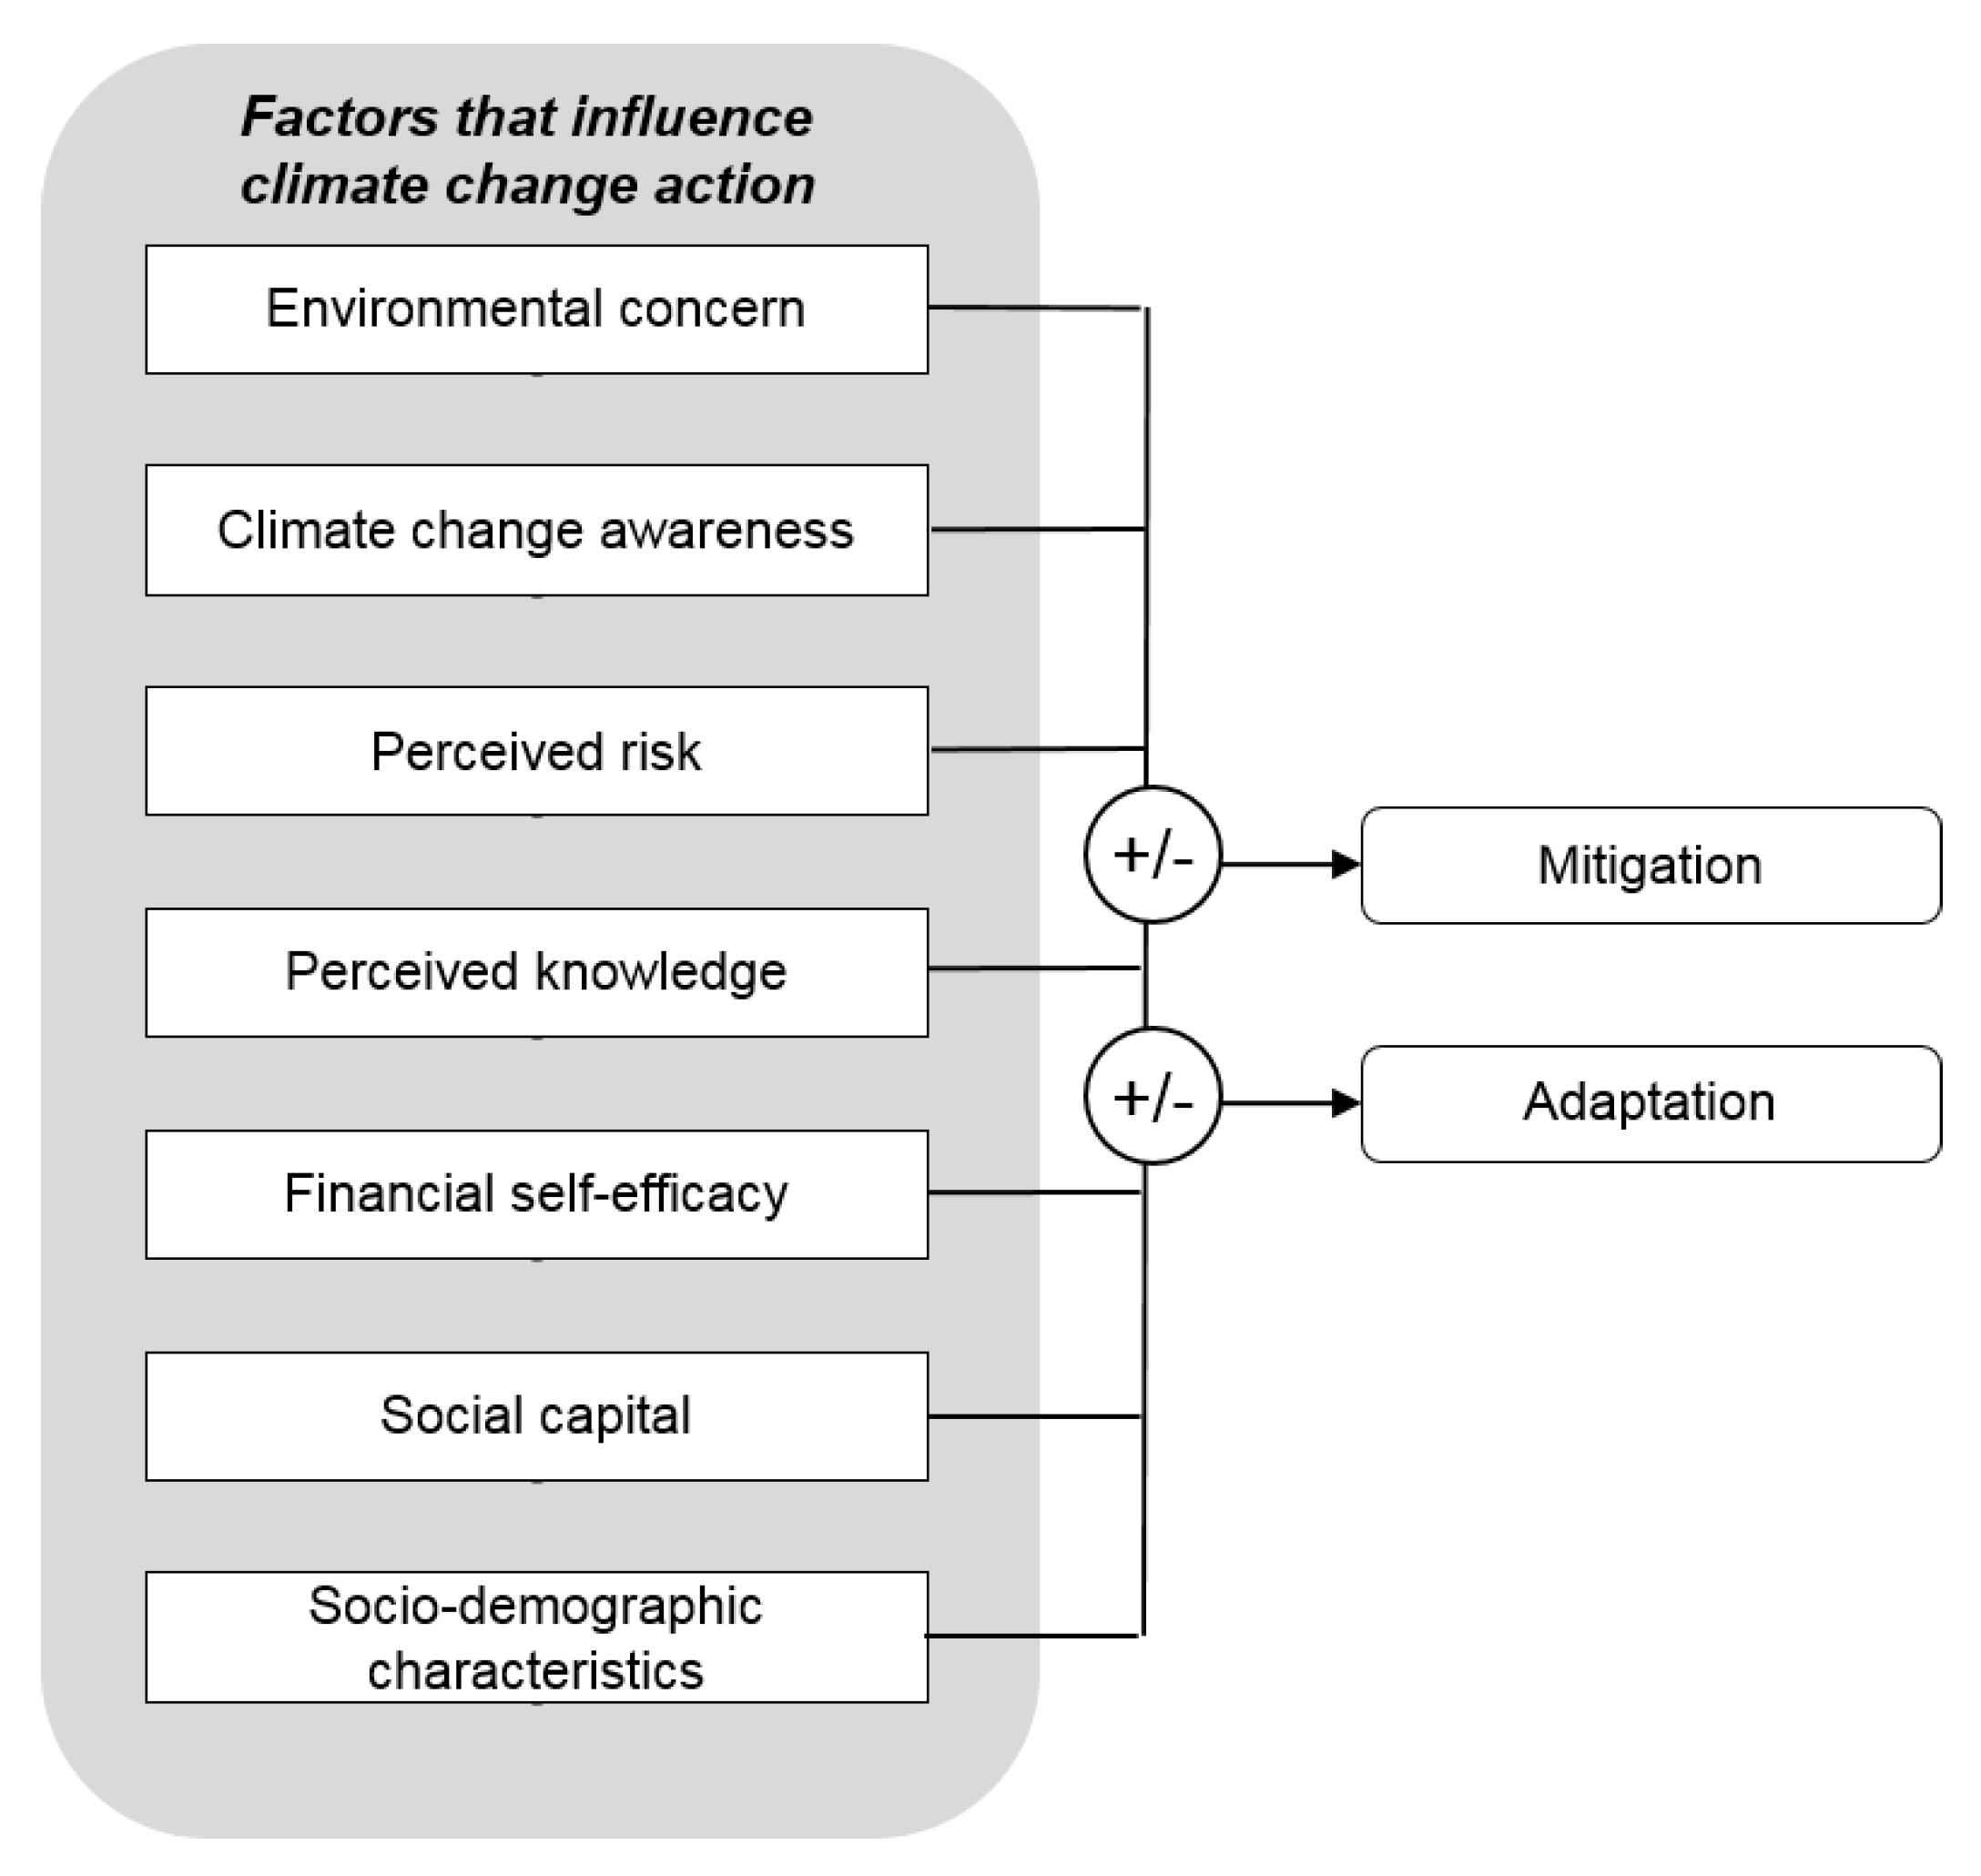 systematic literature review on behavioral barriers of climate change mitigation in households